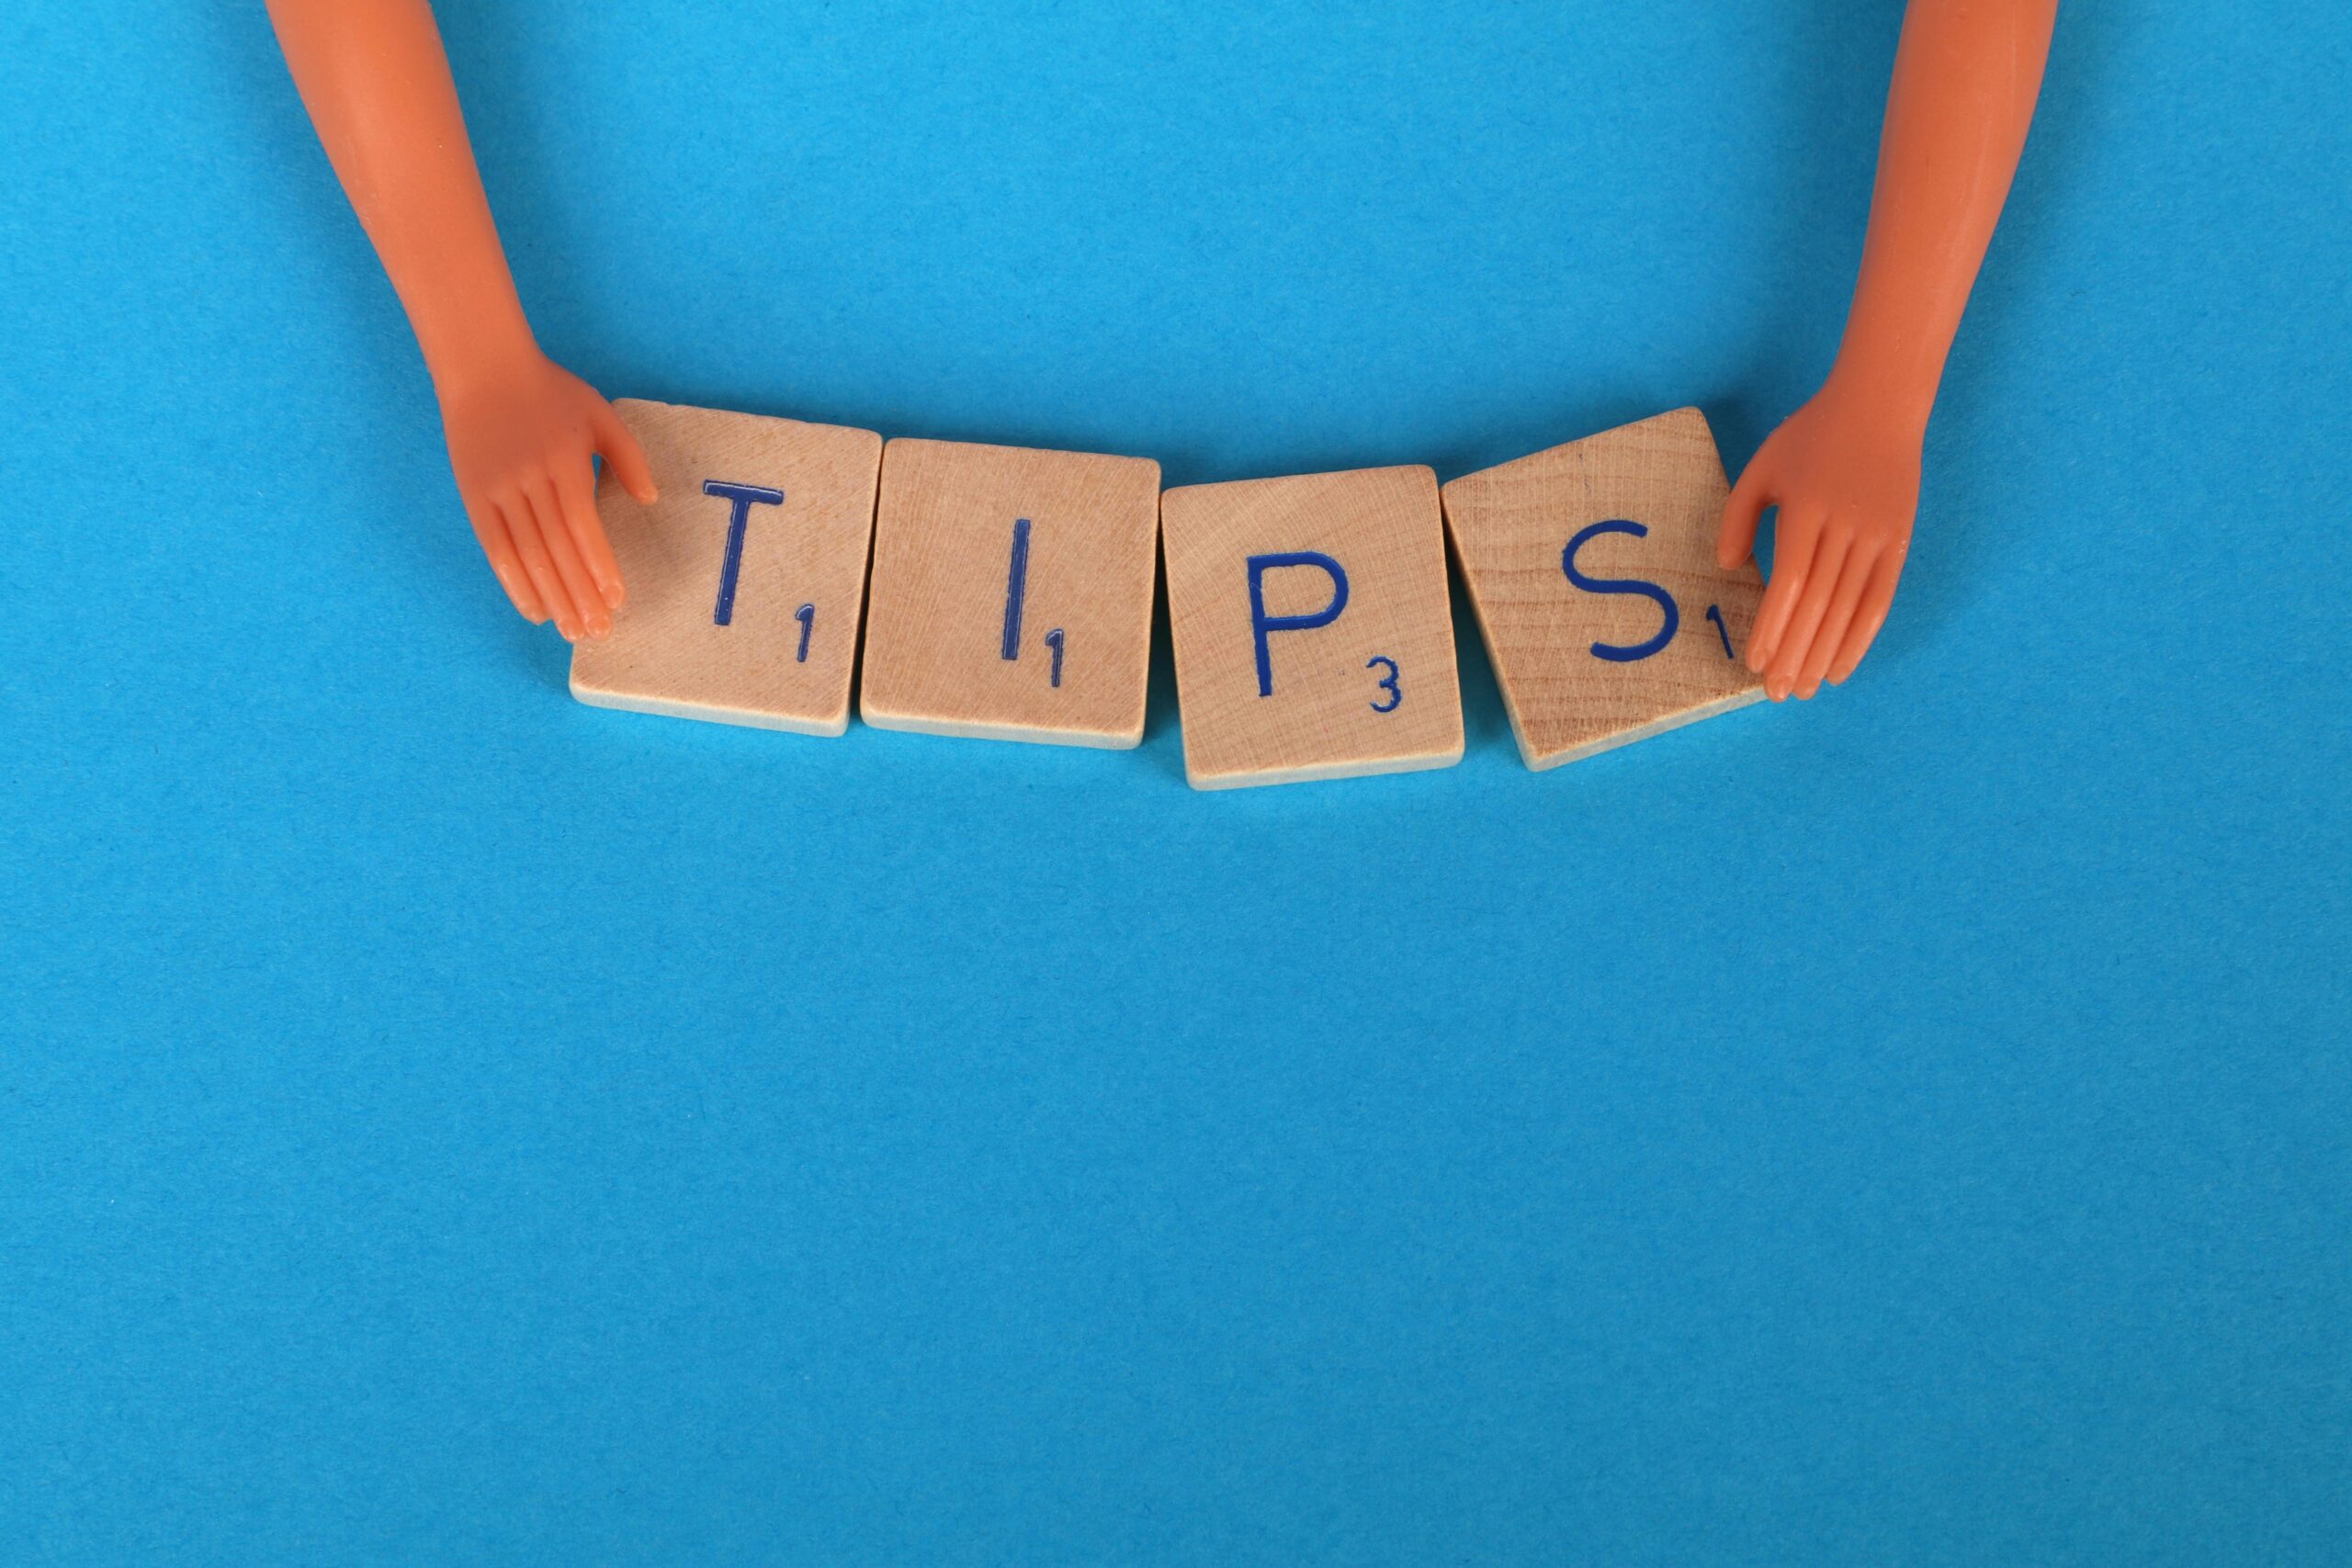 Website Testing Jobs Image of blocks with word "Tips" which is meant for online testers